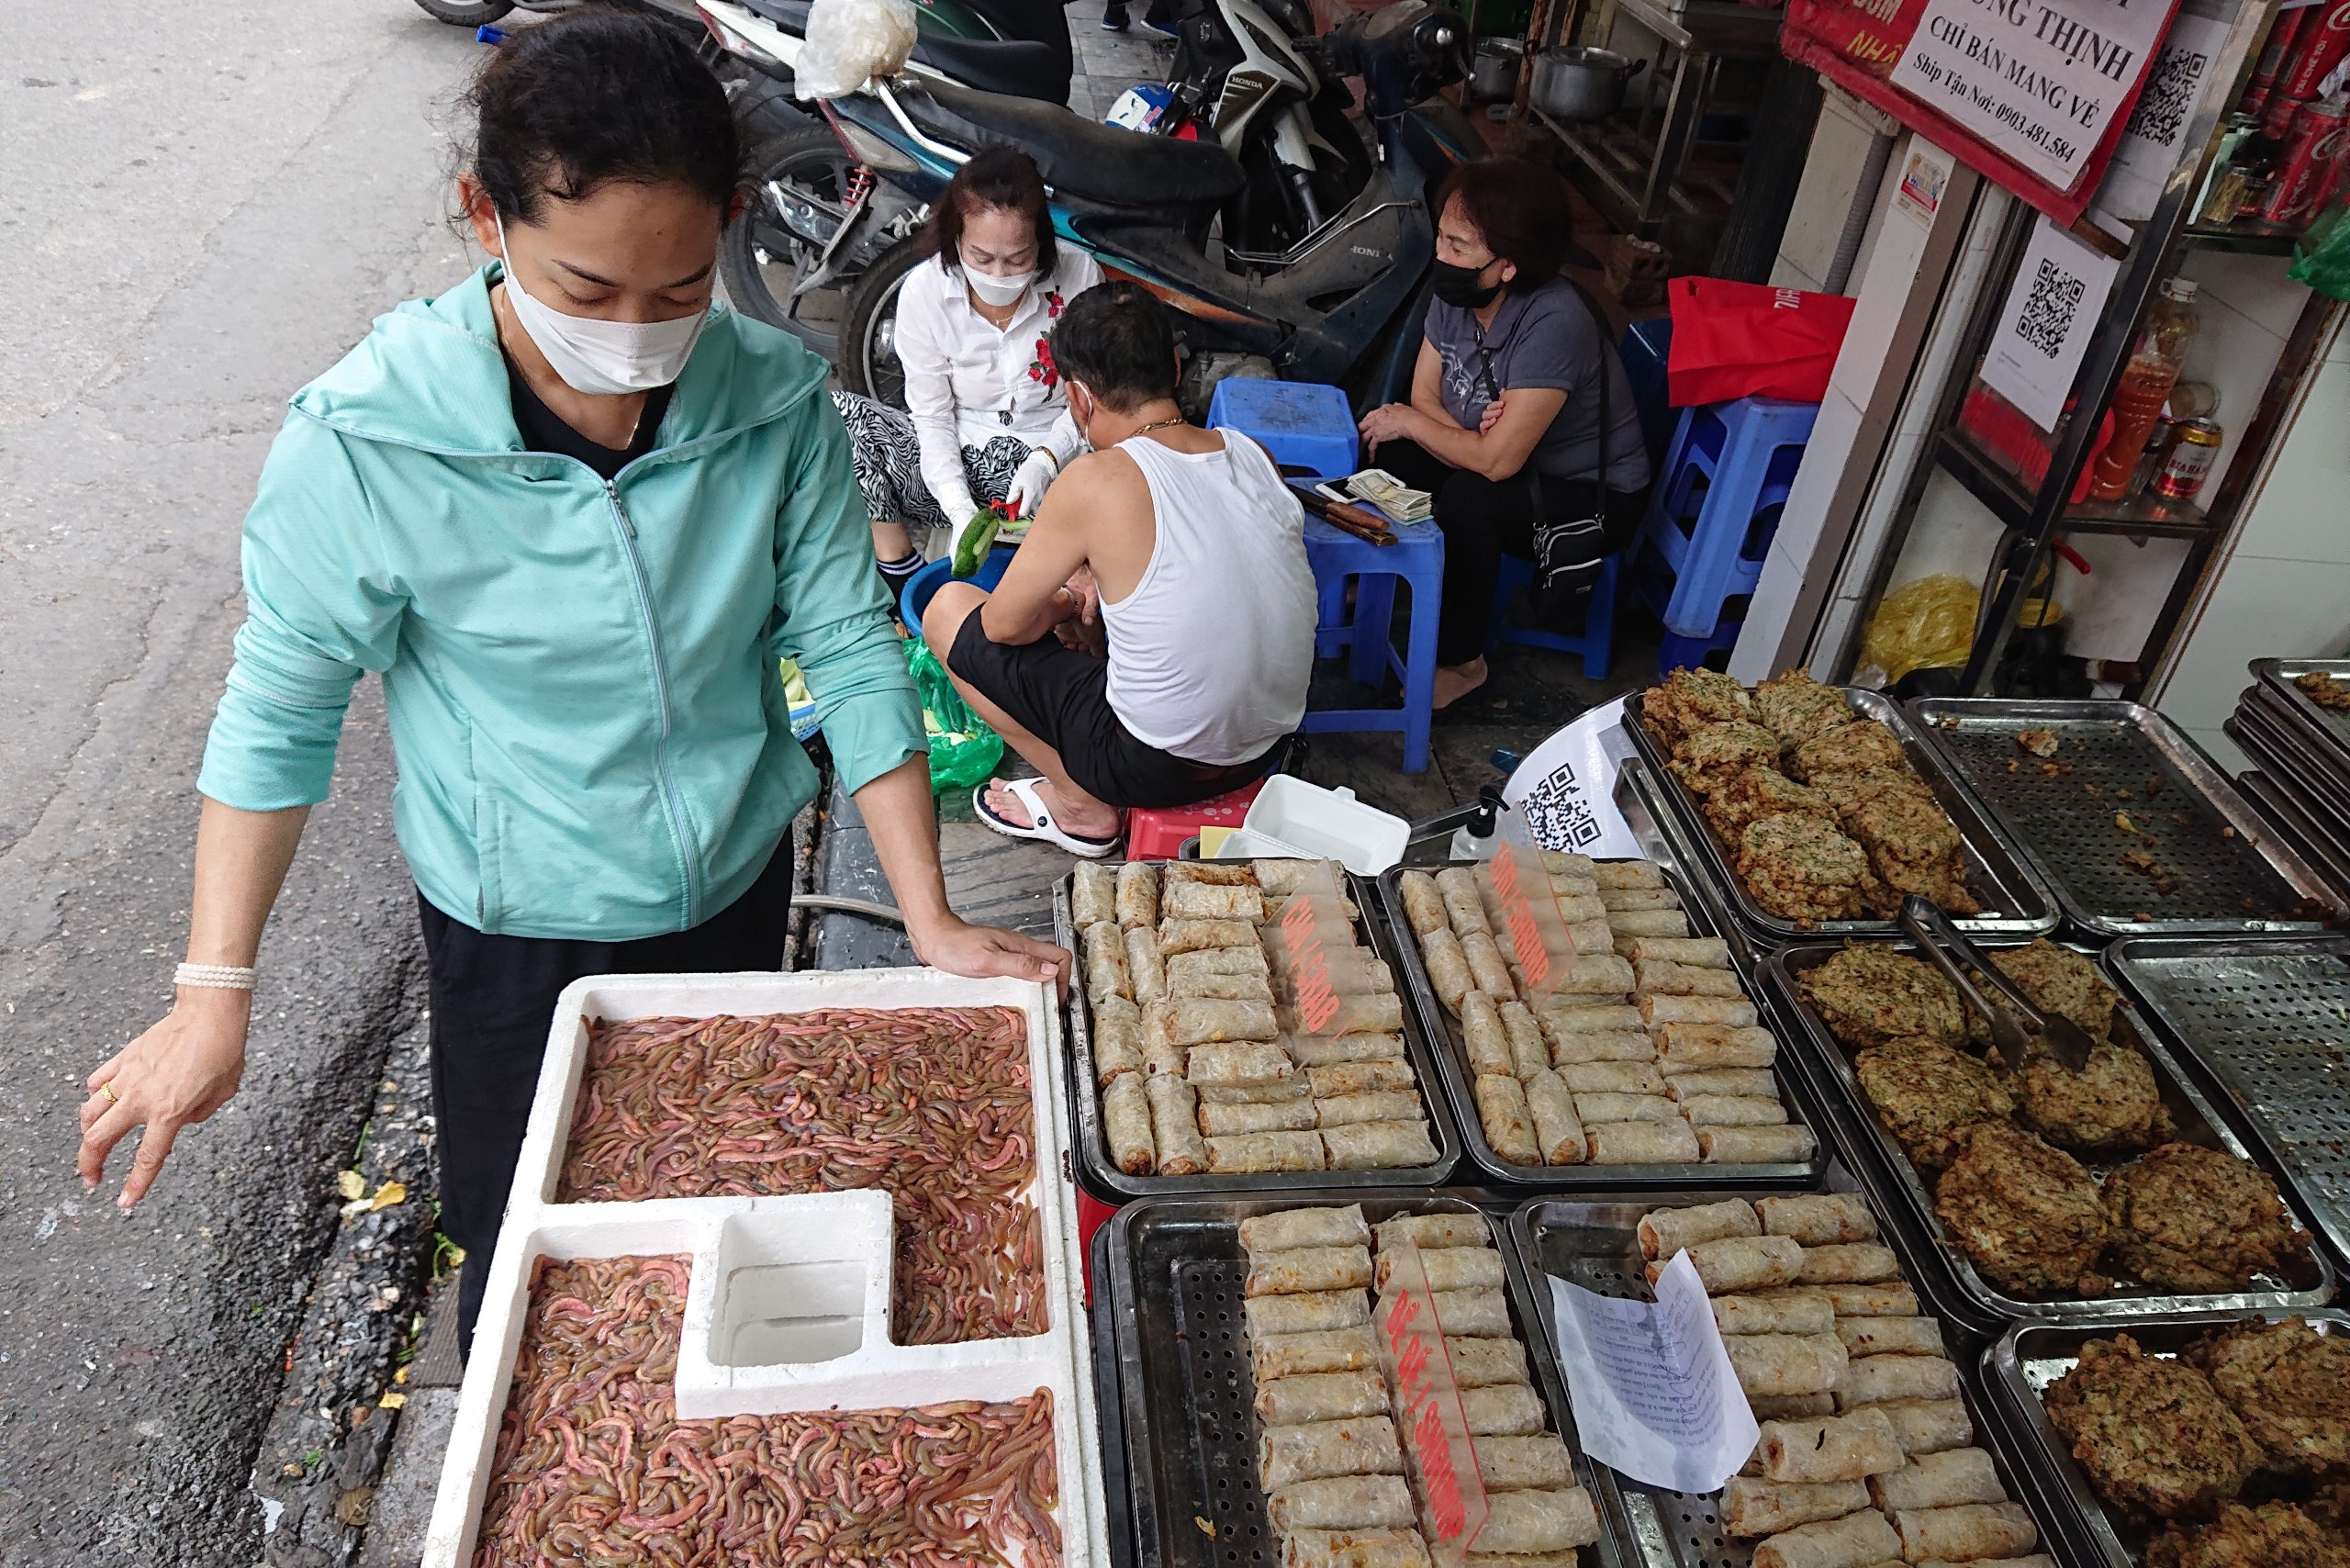 In photos: Cha ruoi - Vietnam’s famous sand worm omelet